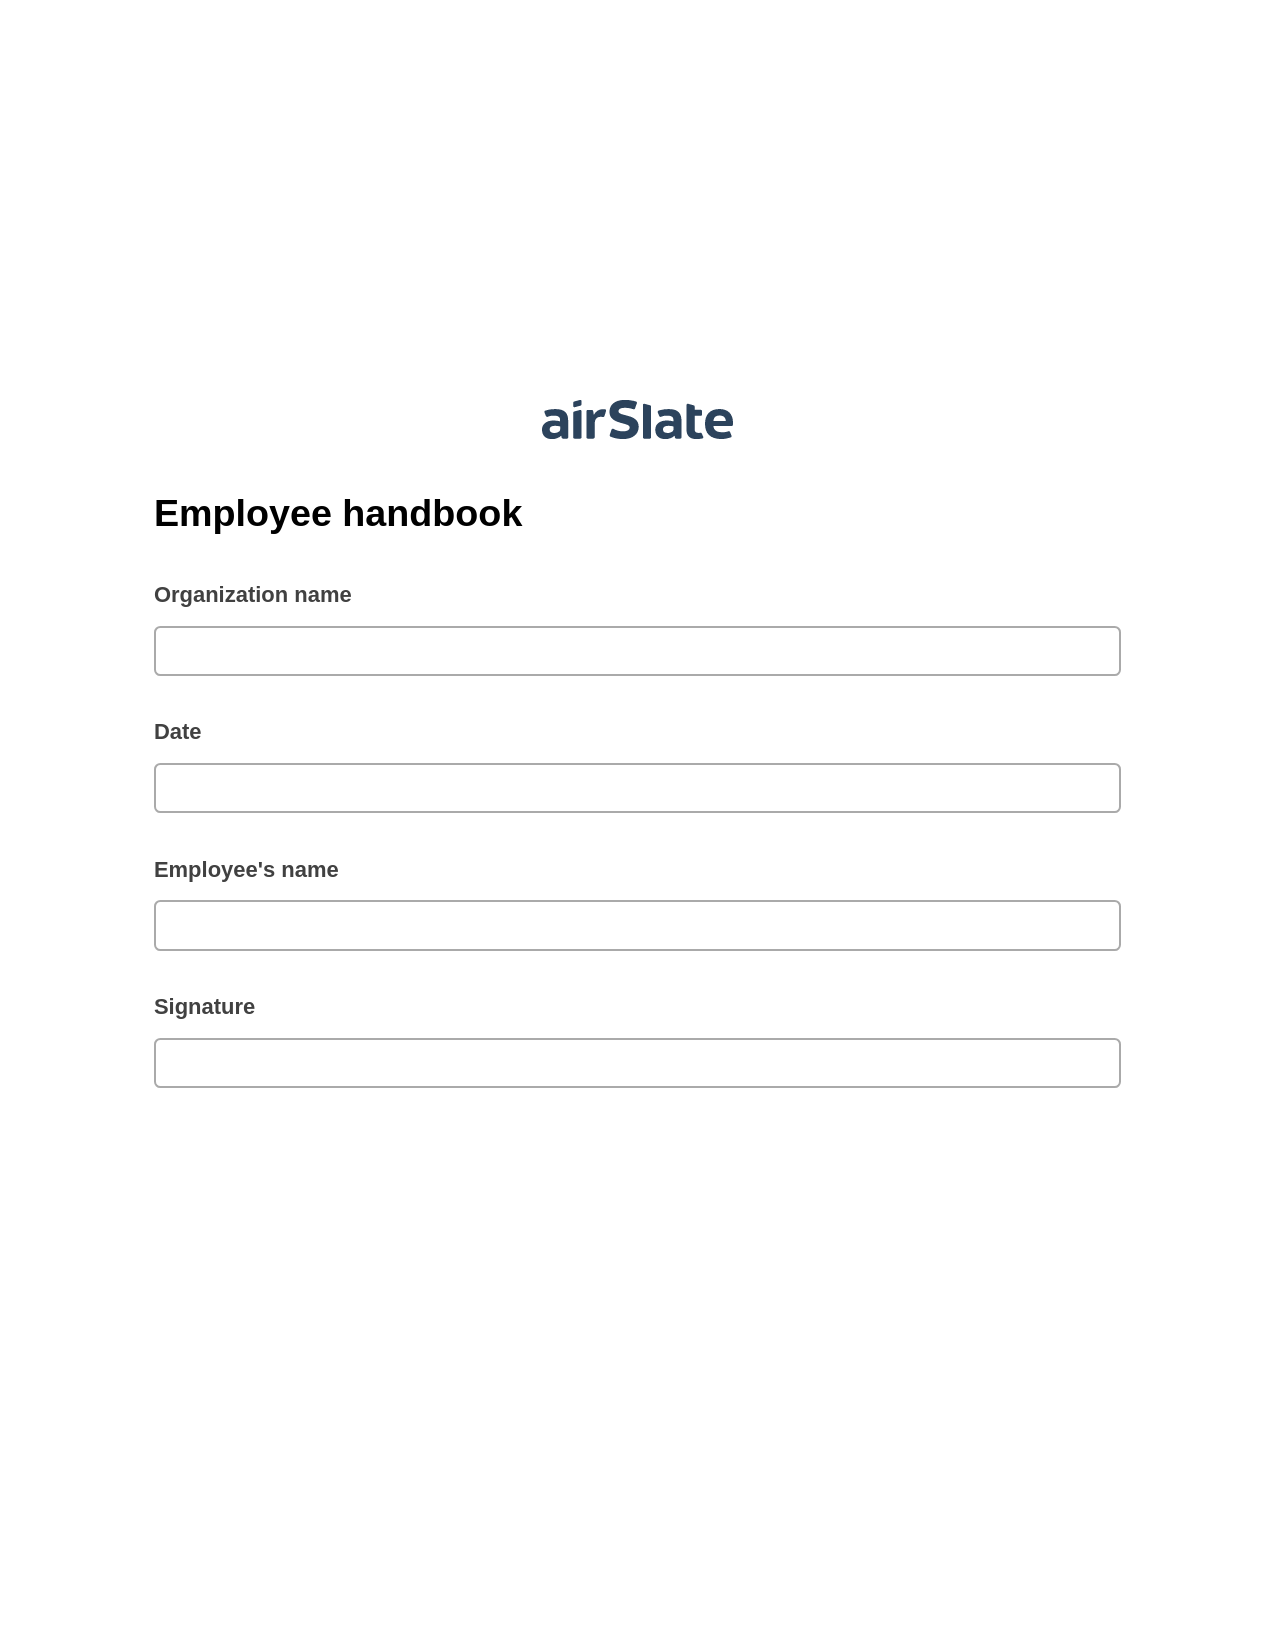 Employee handbook Pre-fill from Excel Spreadsheet Bot, Slack Notification Bot, Export to NetSuite Record Bot